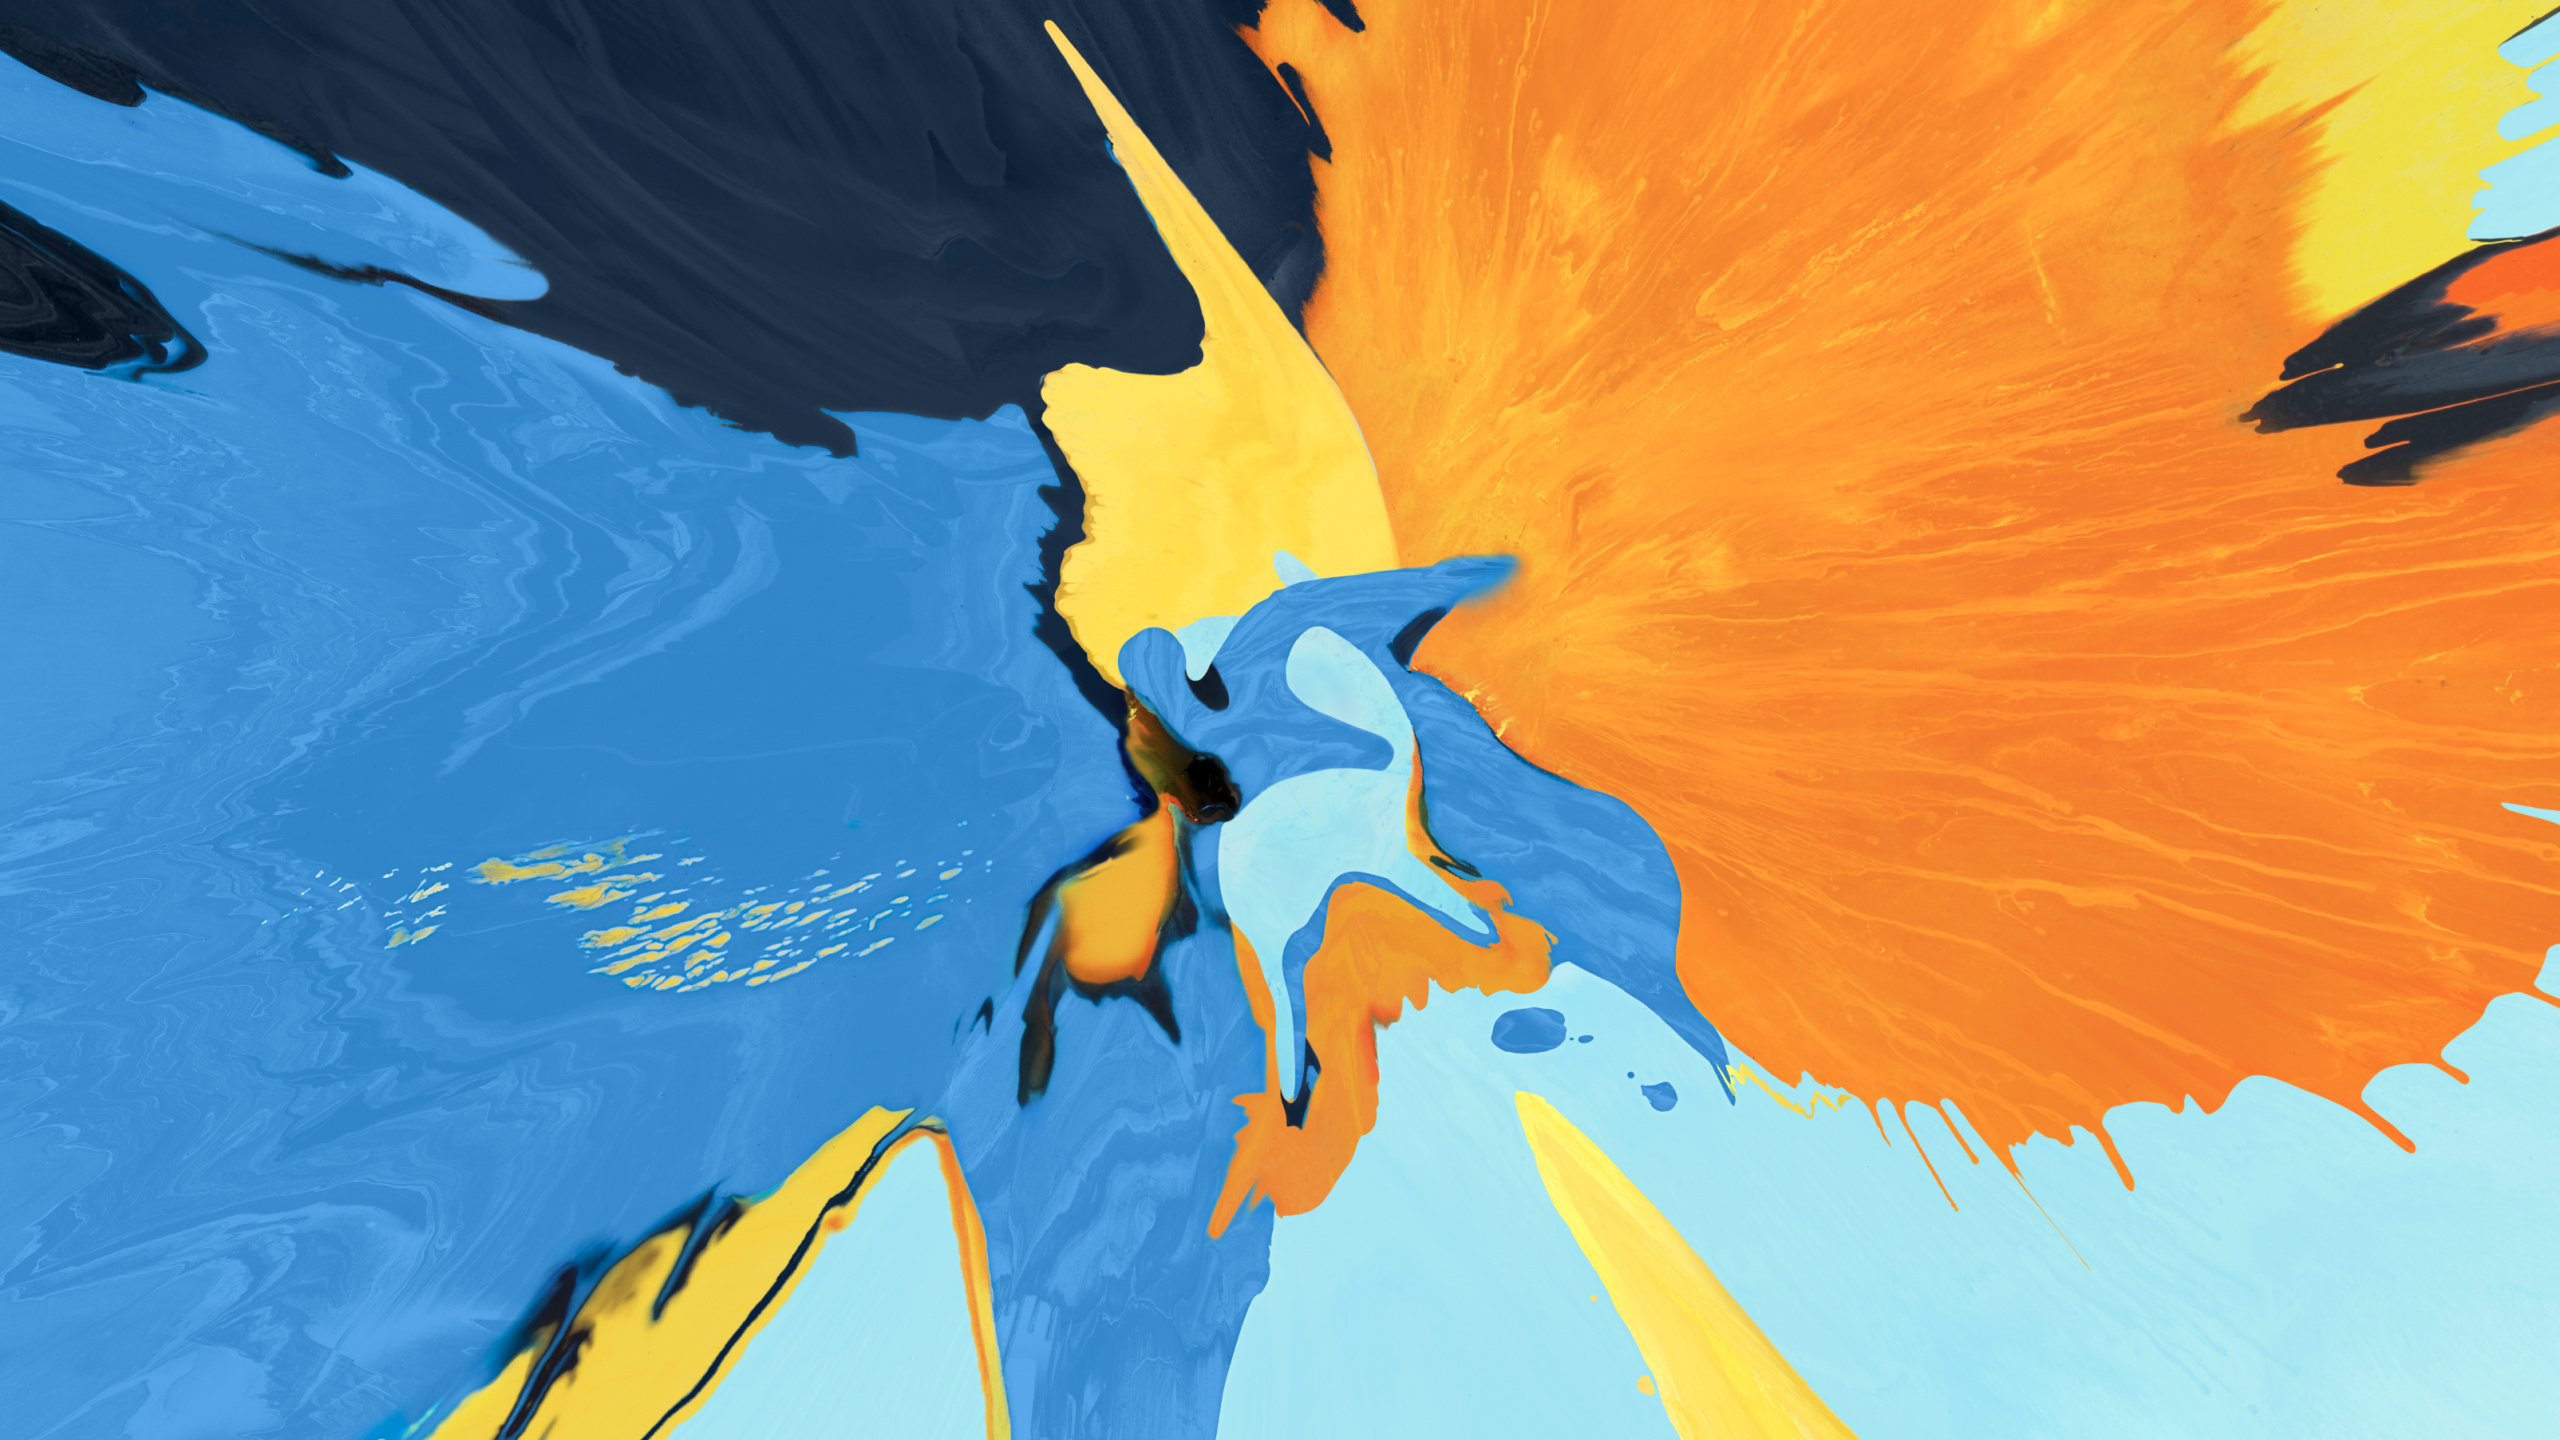 Blue Yellow and Black Bird Painting. Wallpaper in 2560x1440 Resolution